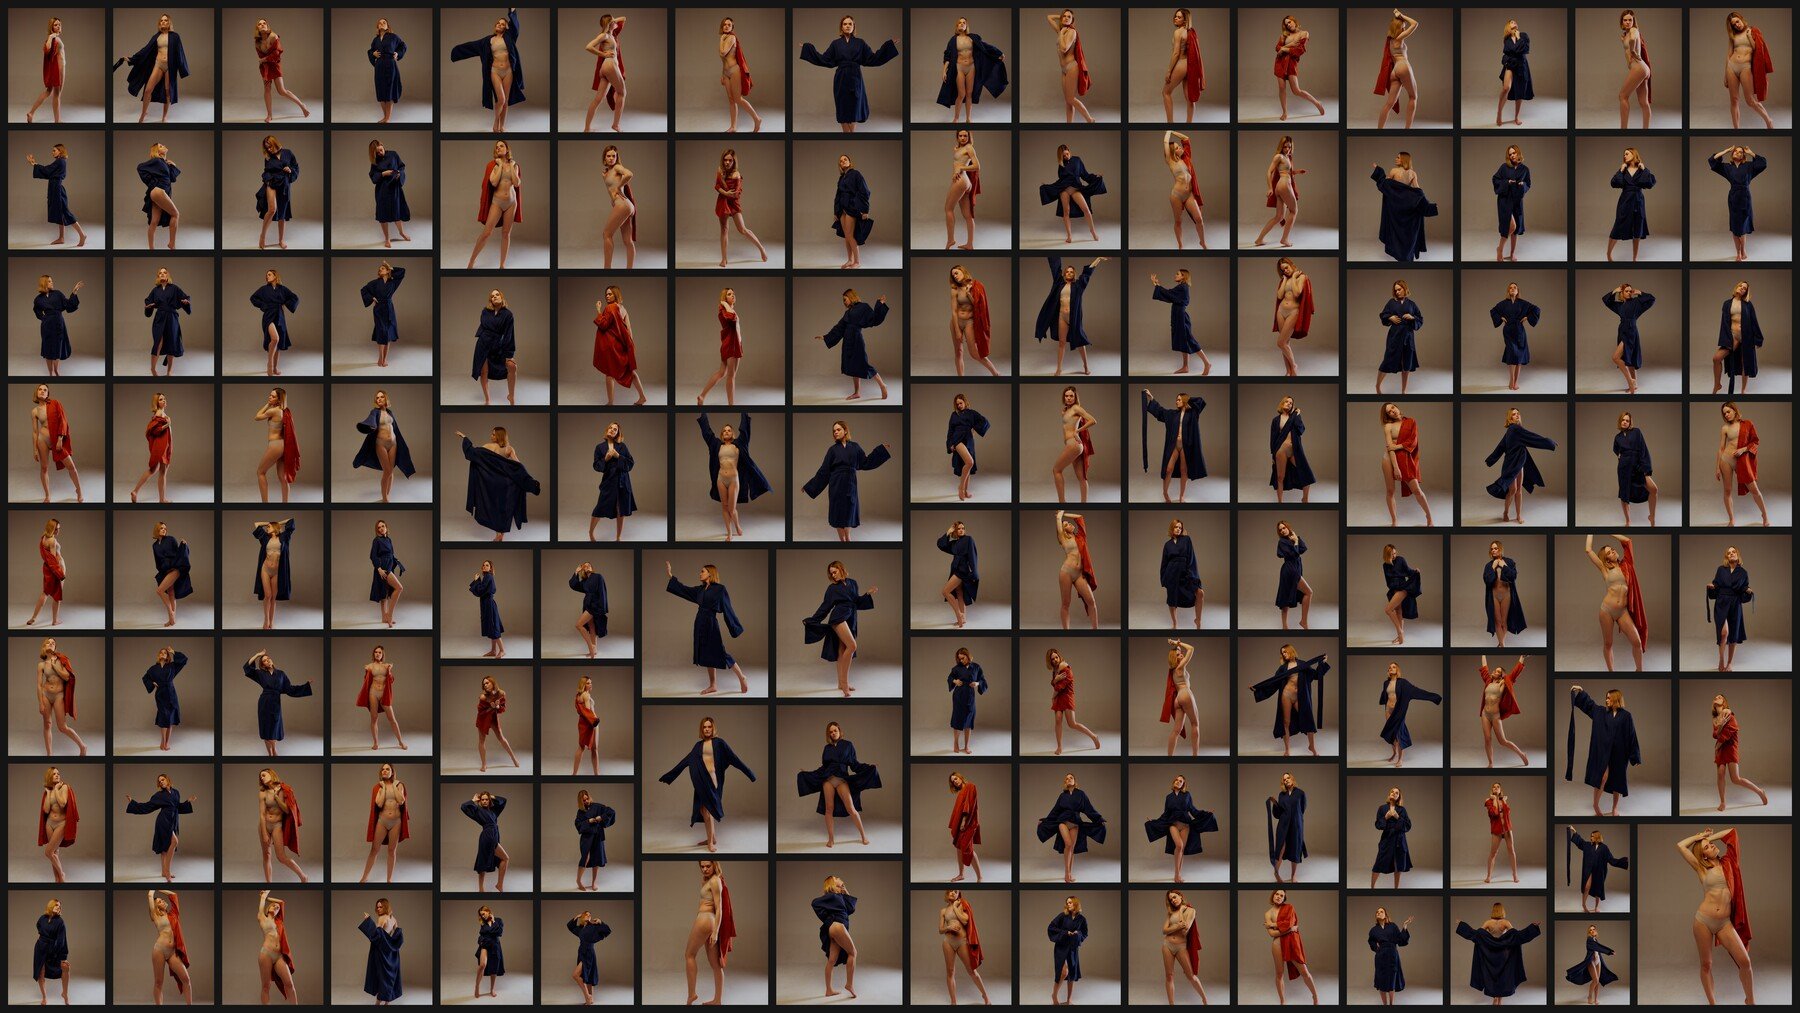 690+ Different Clothes - Female Poses for Daily Sketching